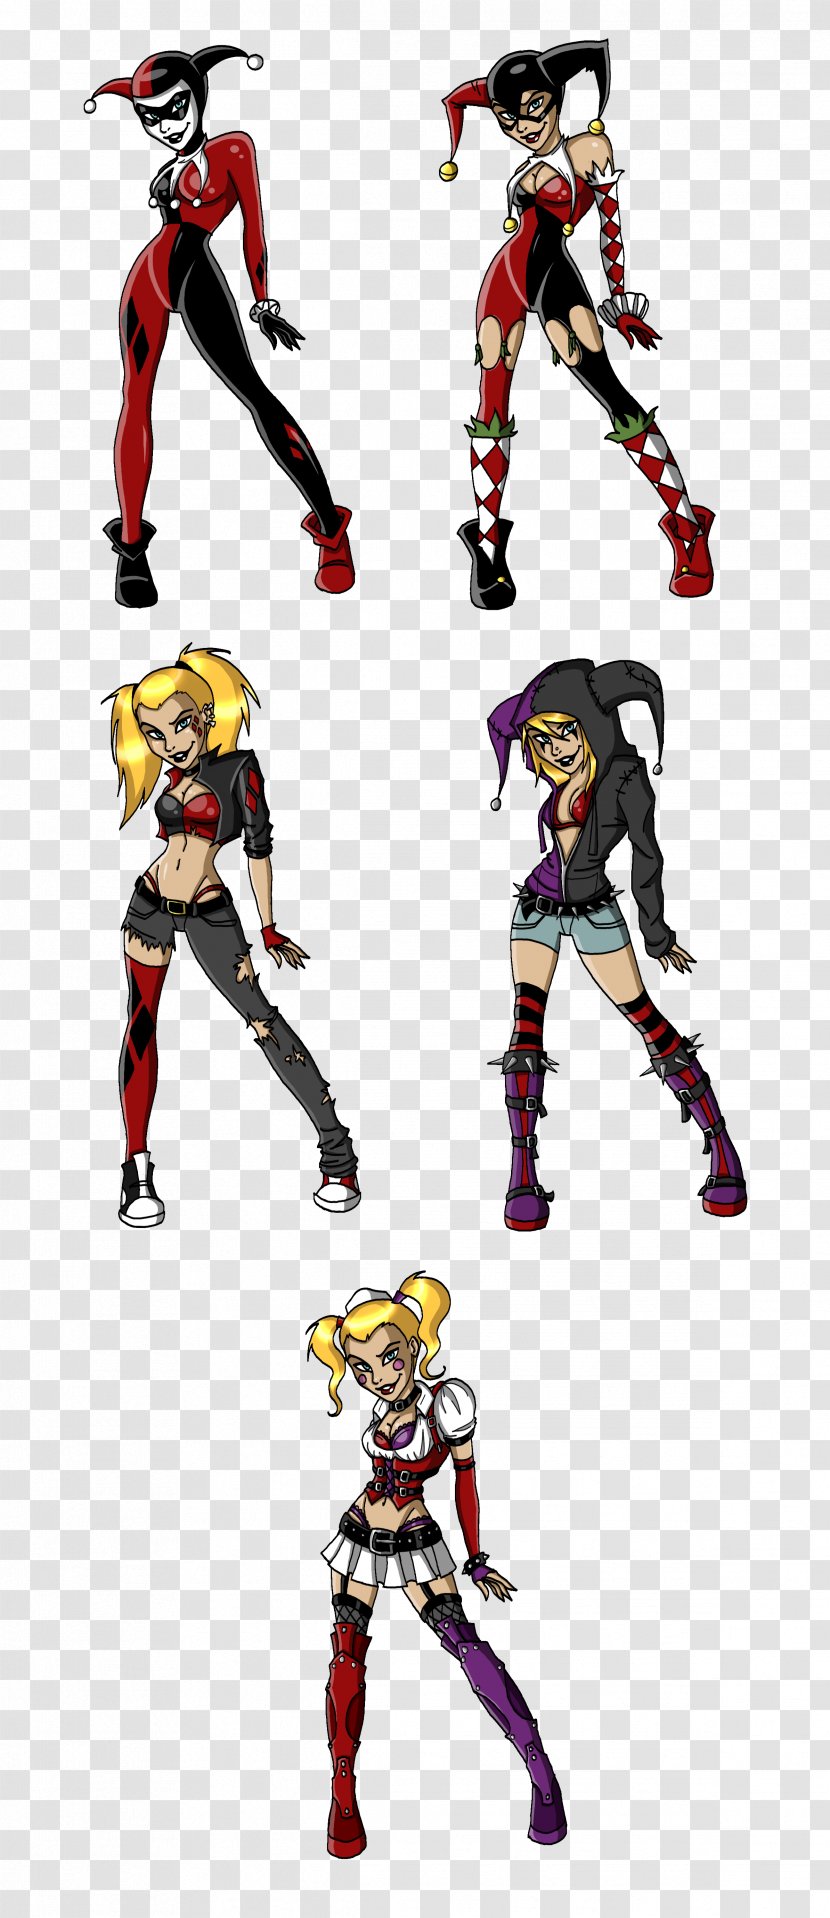 Costume Design Shoe Action & Toy Figures Character - Cartoon - Adaptations Pattern Transparent PNG